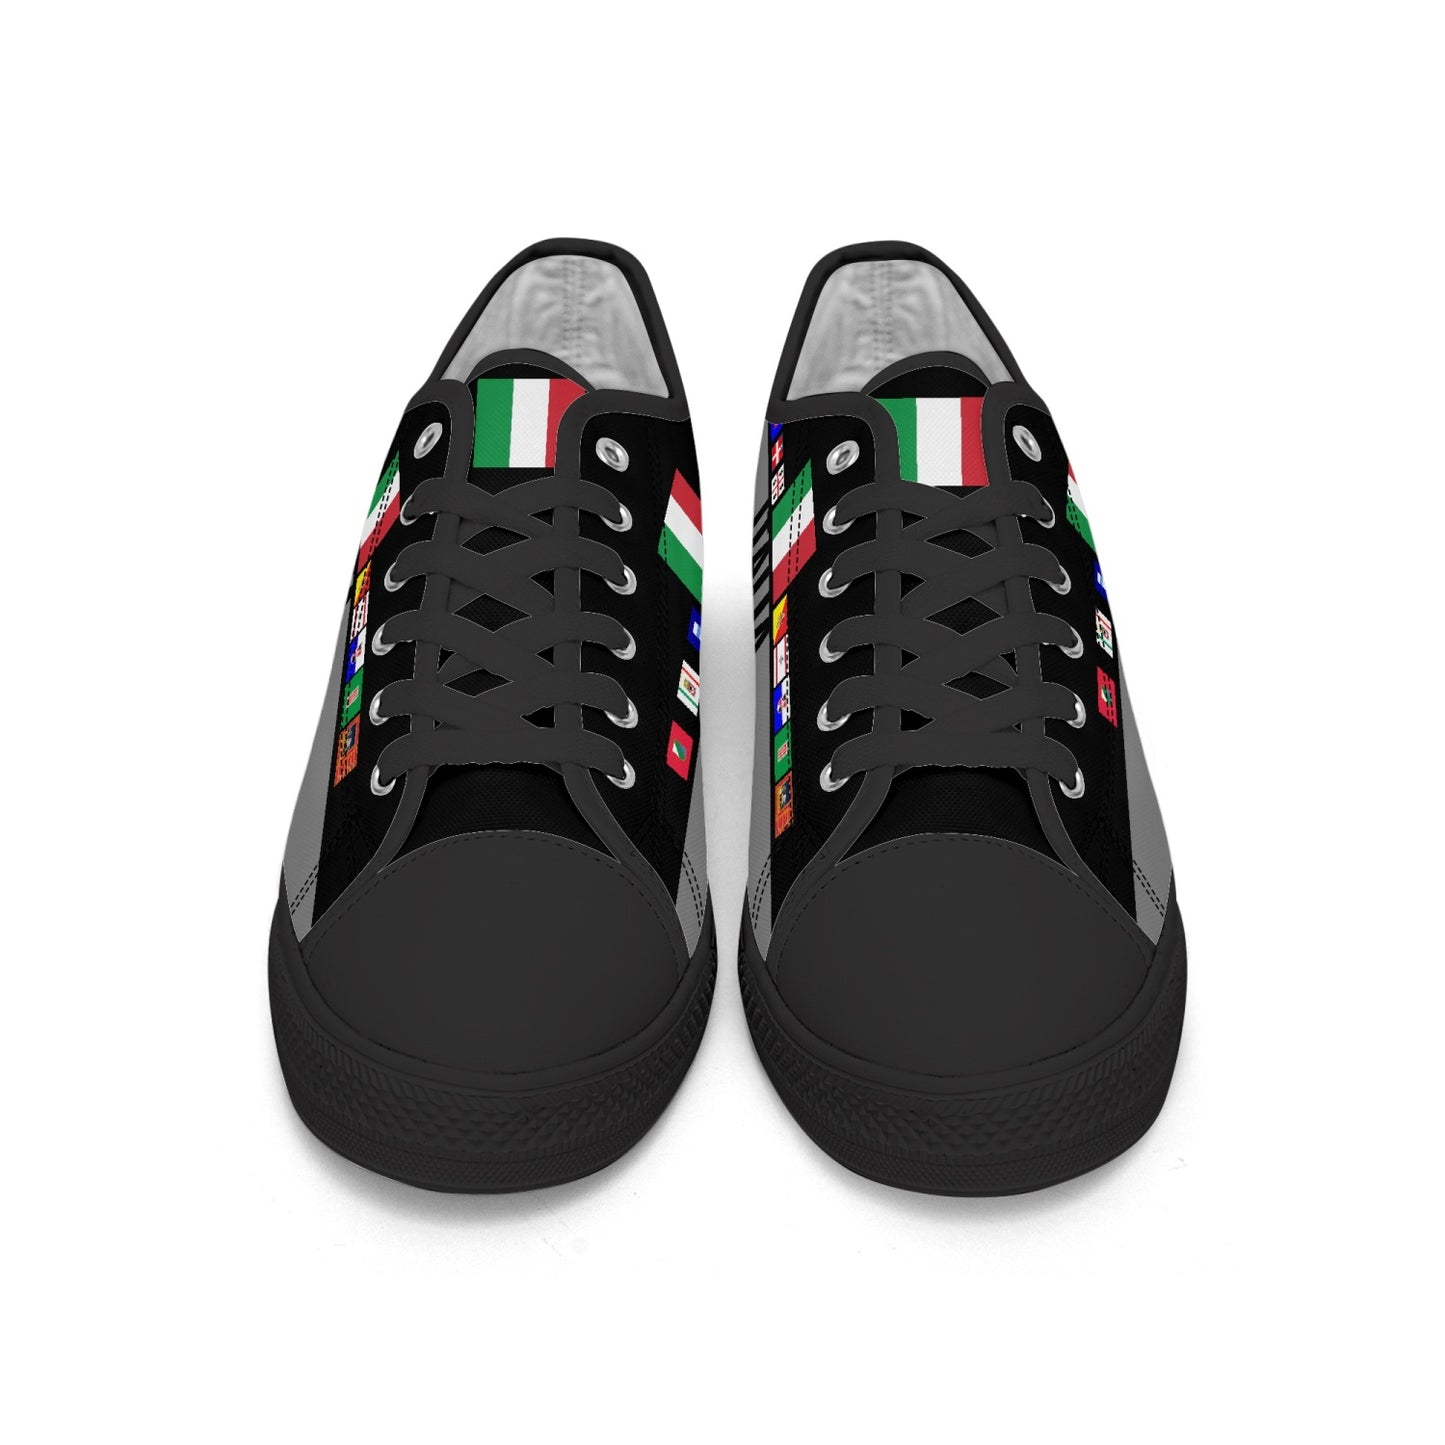 Italy regions black Shoes Low-top V2